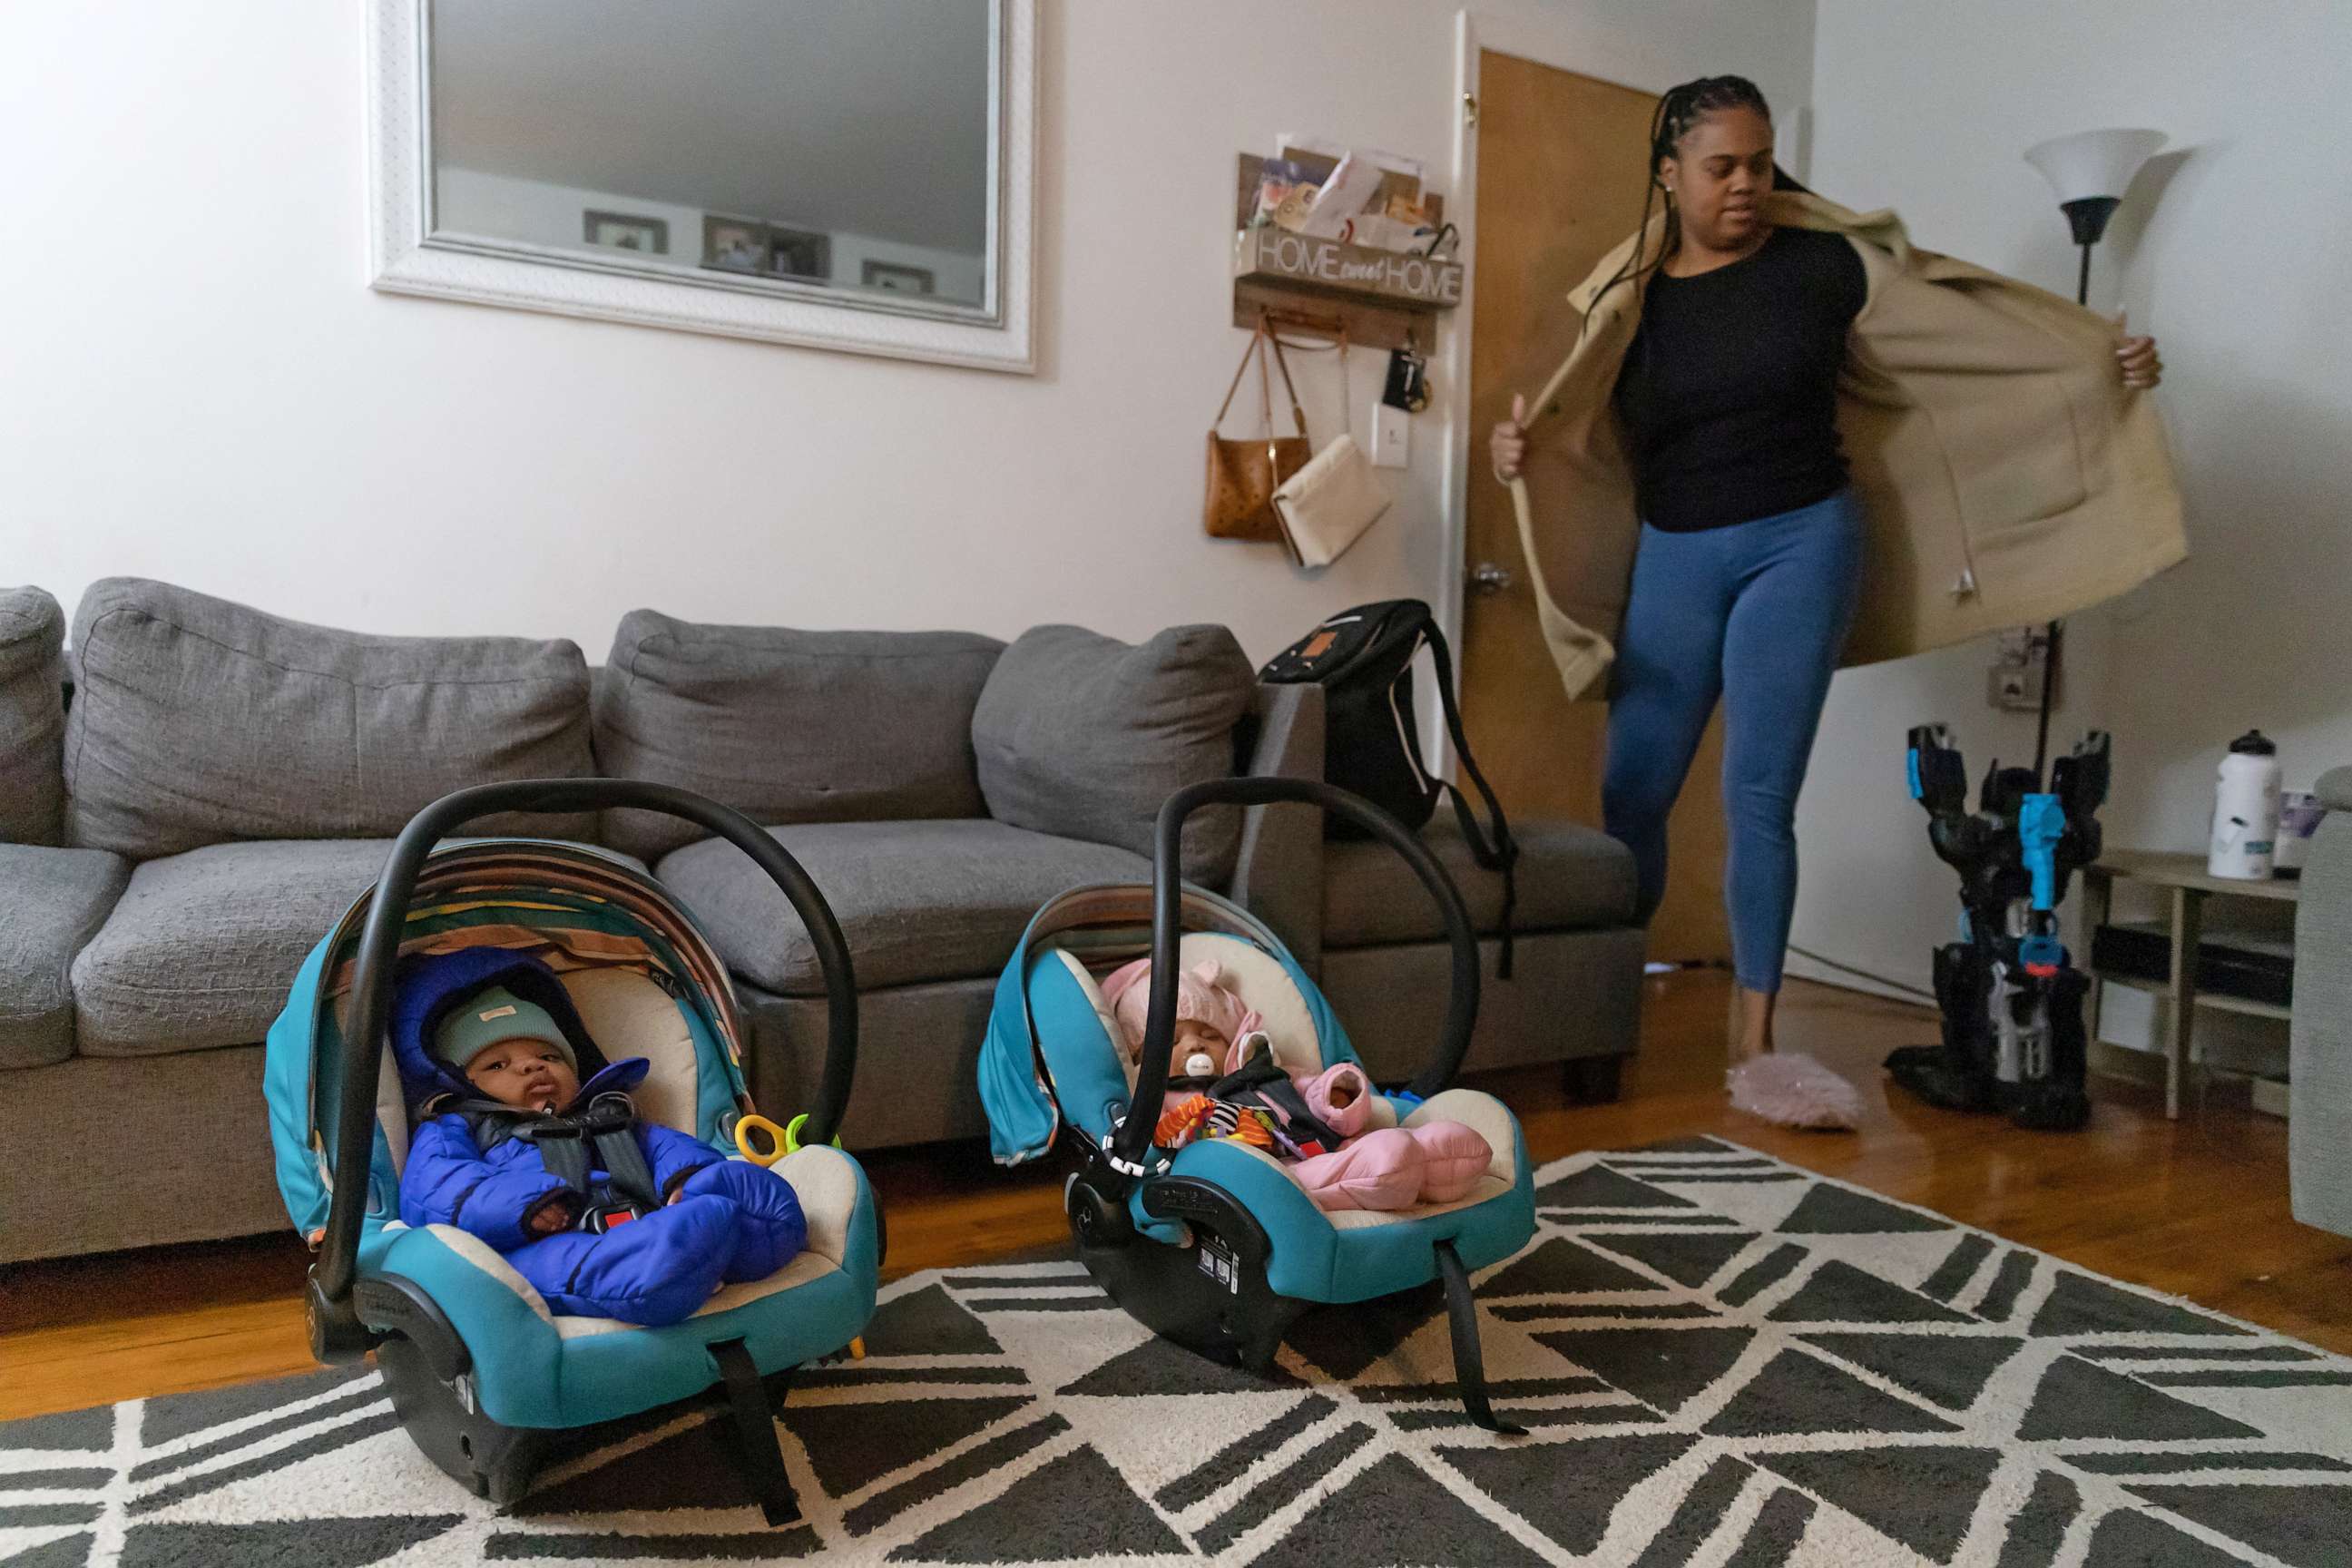 PHOTO: Chelsea Ward, 32, takes her coat off after picking up her seven-month-old twins, Callie Rae Polen and Cai Ryan Polen, from daycare in Fords, N.J., Jan. 13, 2023.